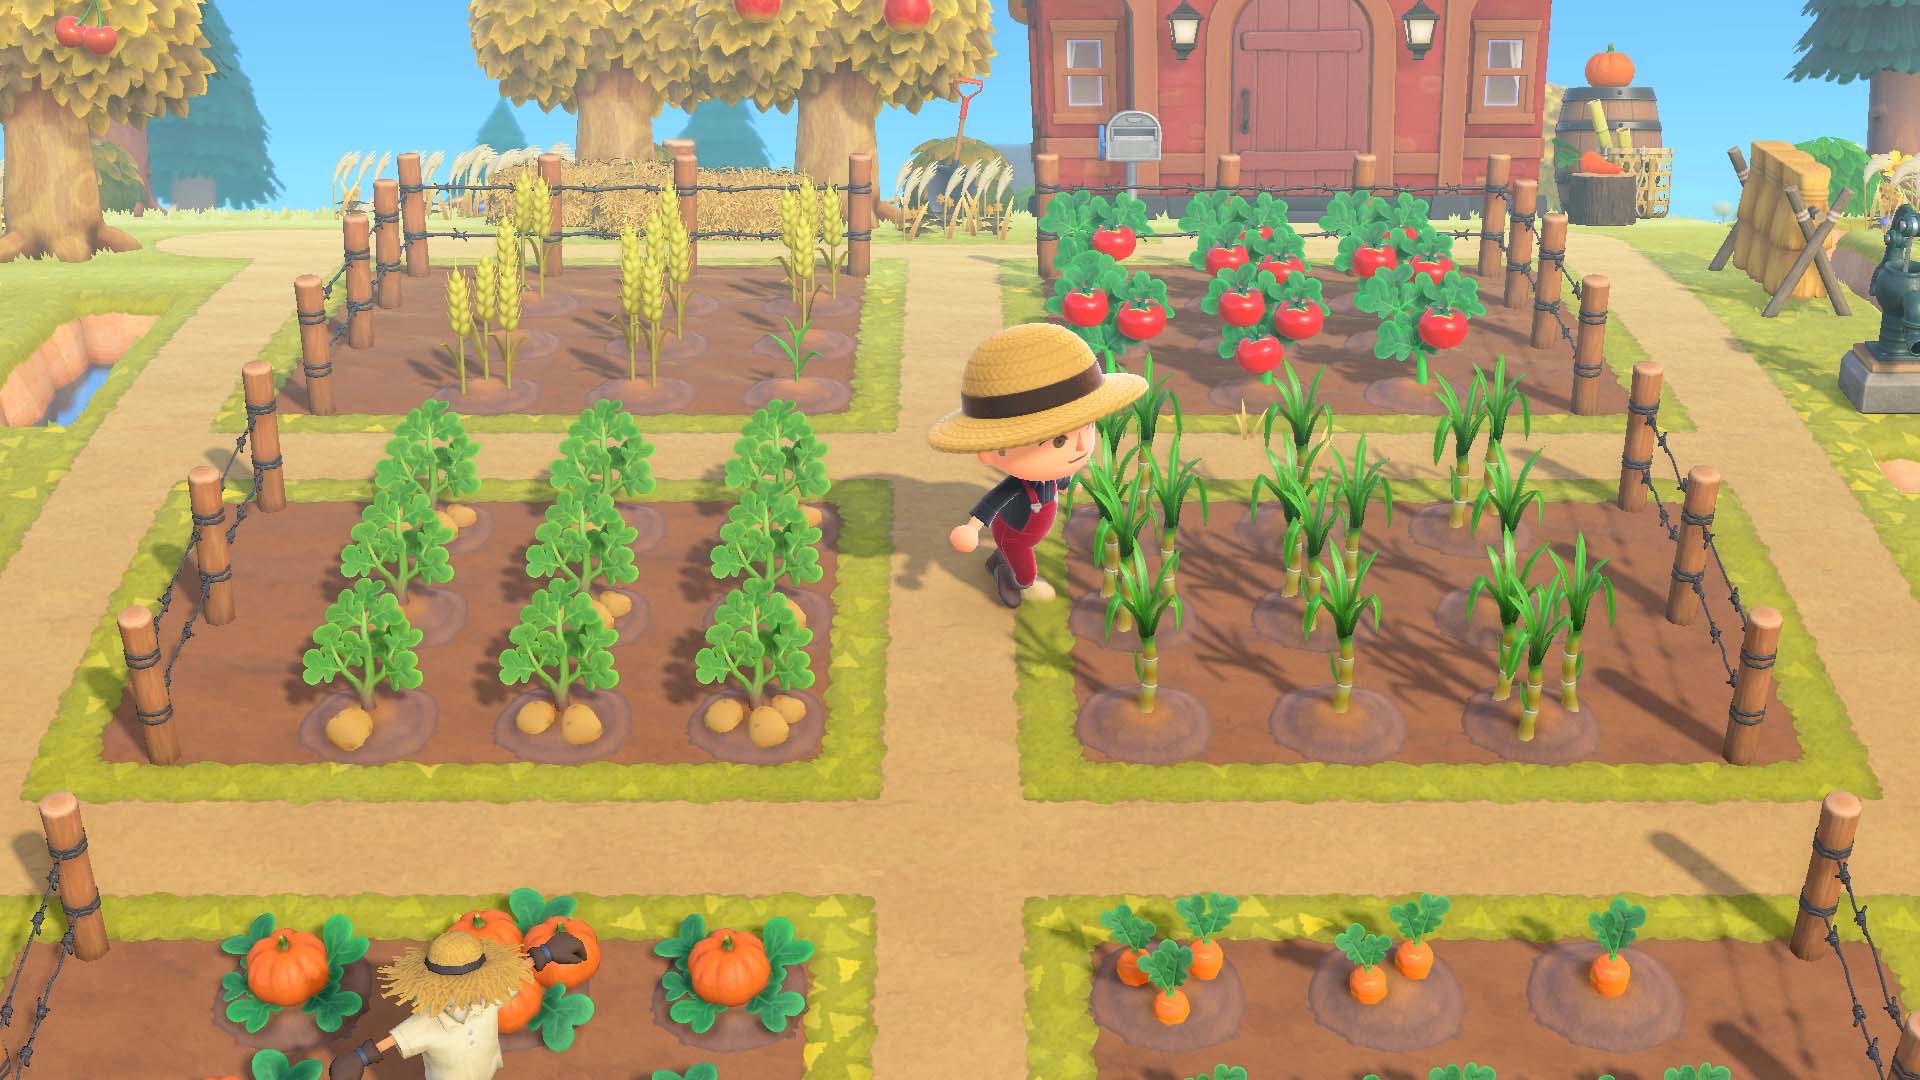 Guide - Farming in Animal Crossing: New Horizons